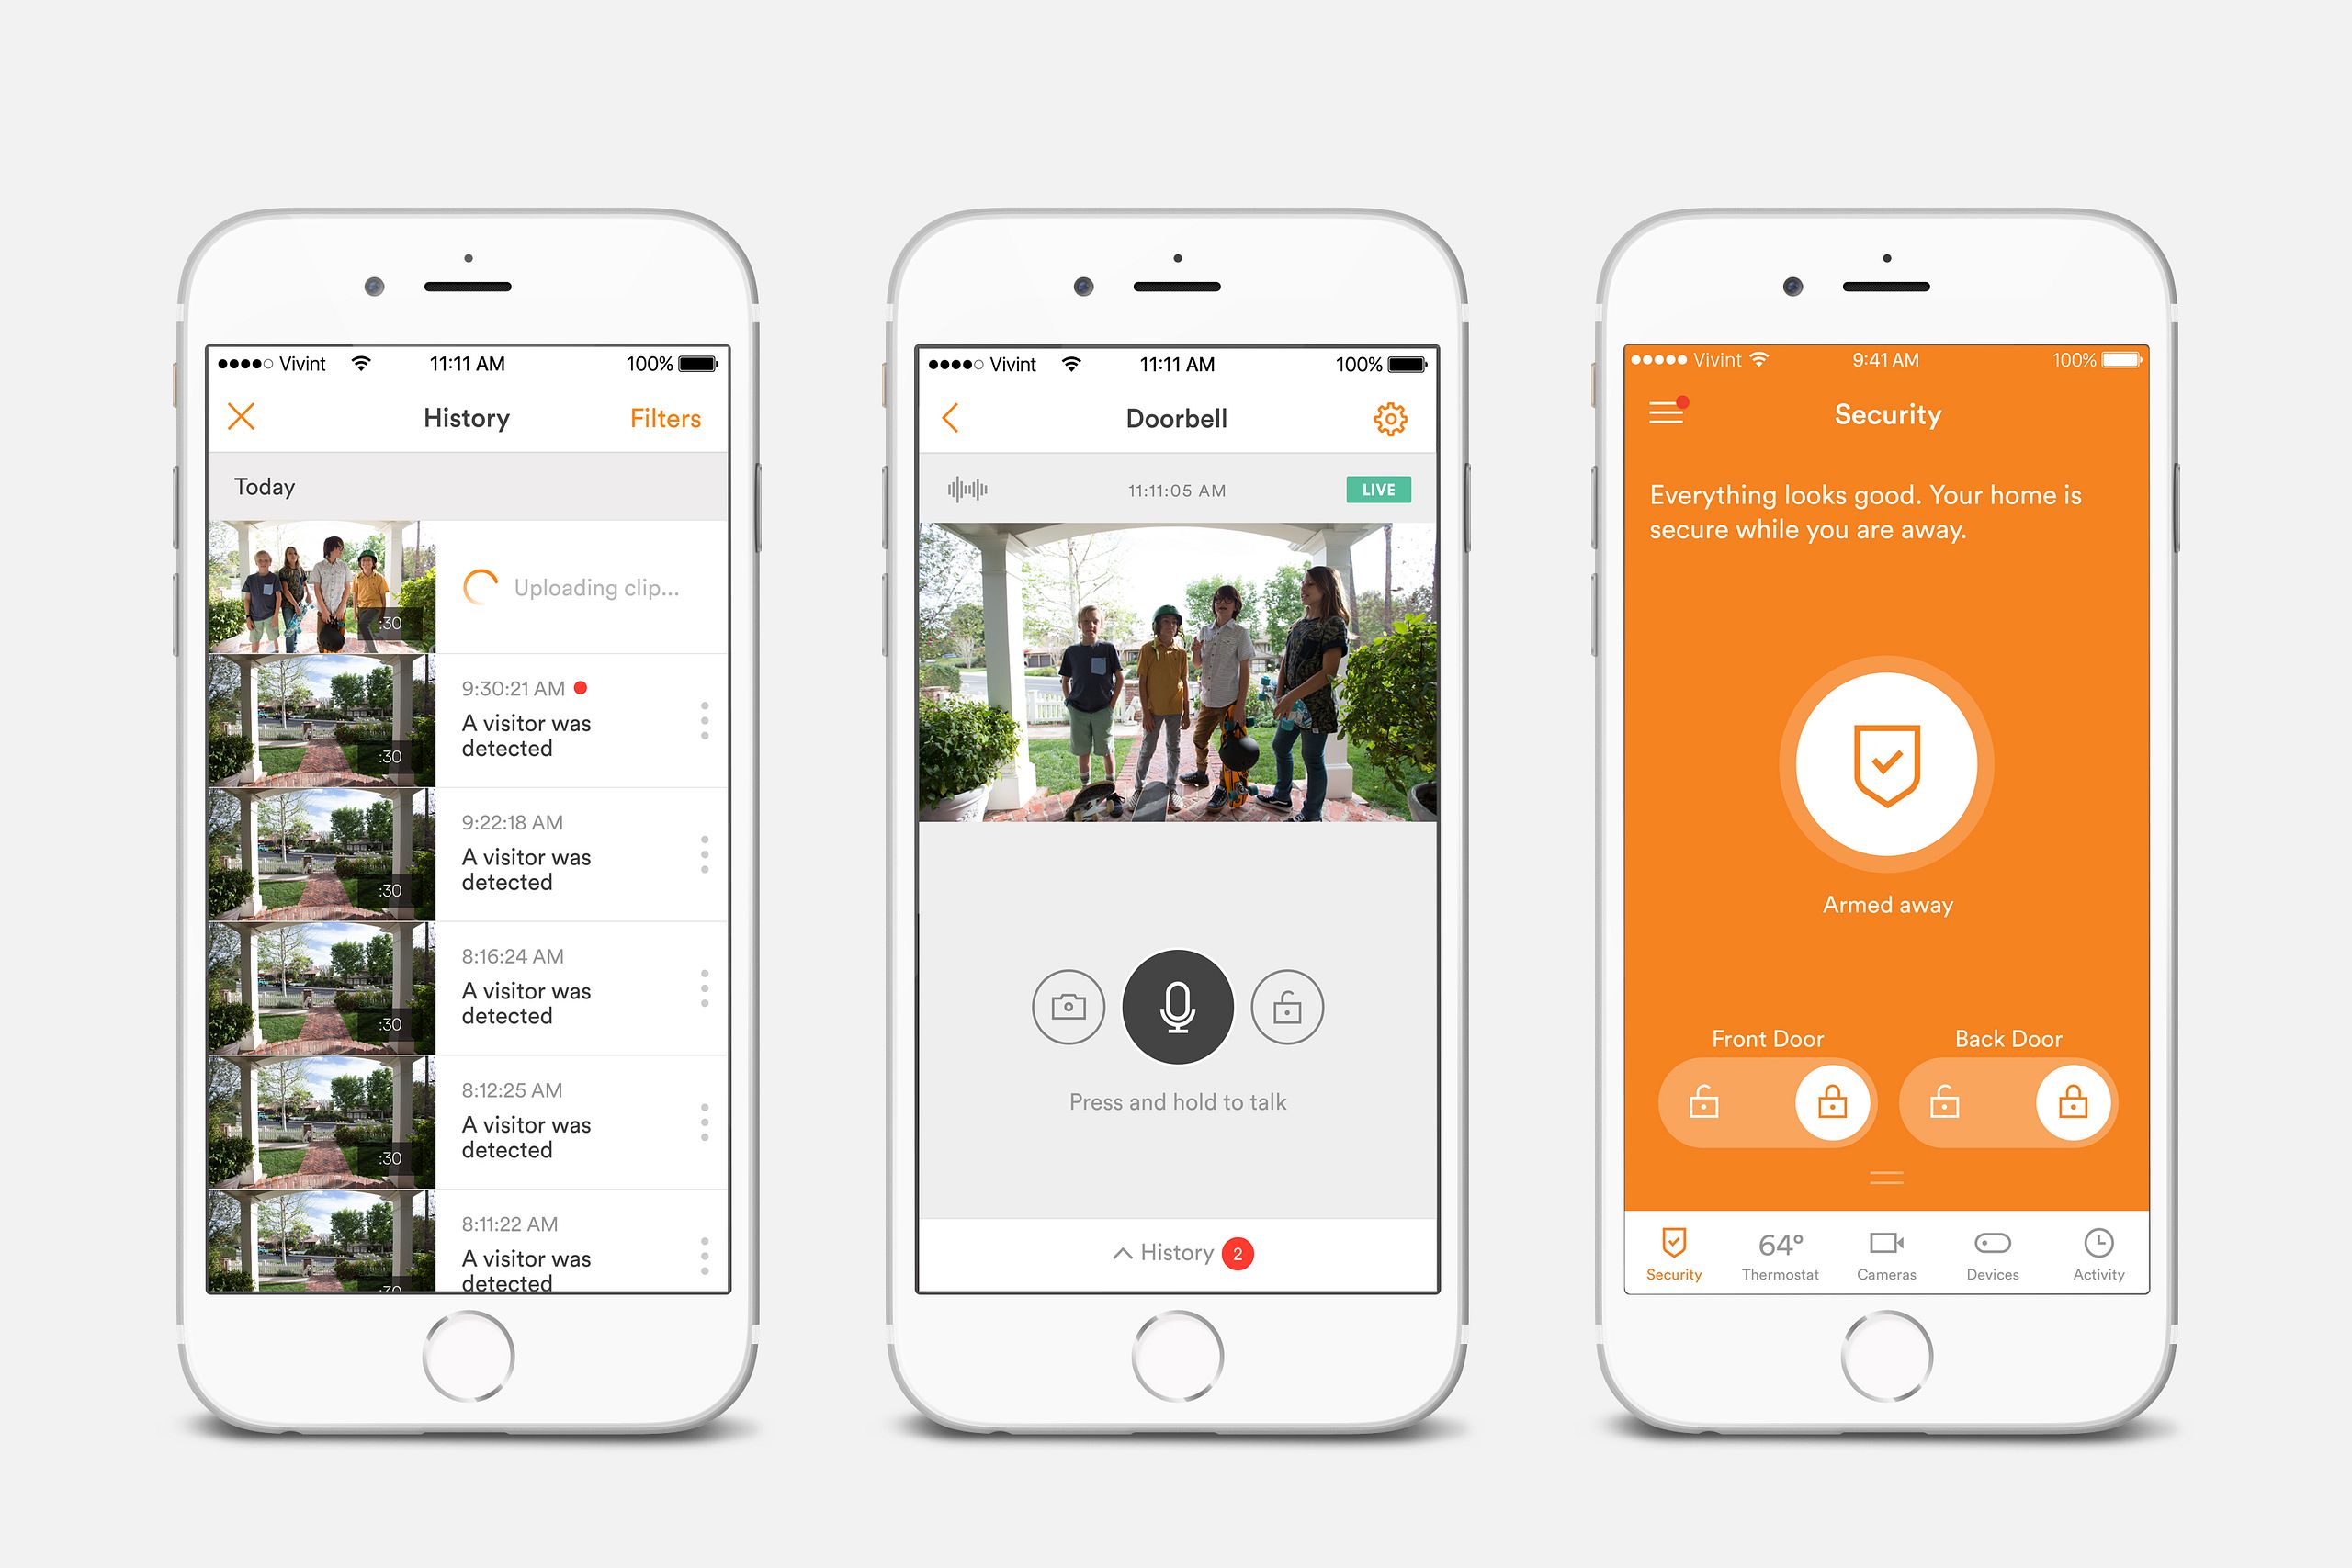 Vivint Home Security Protect Your Home and Make It Smart